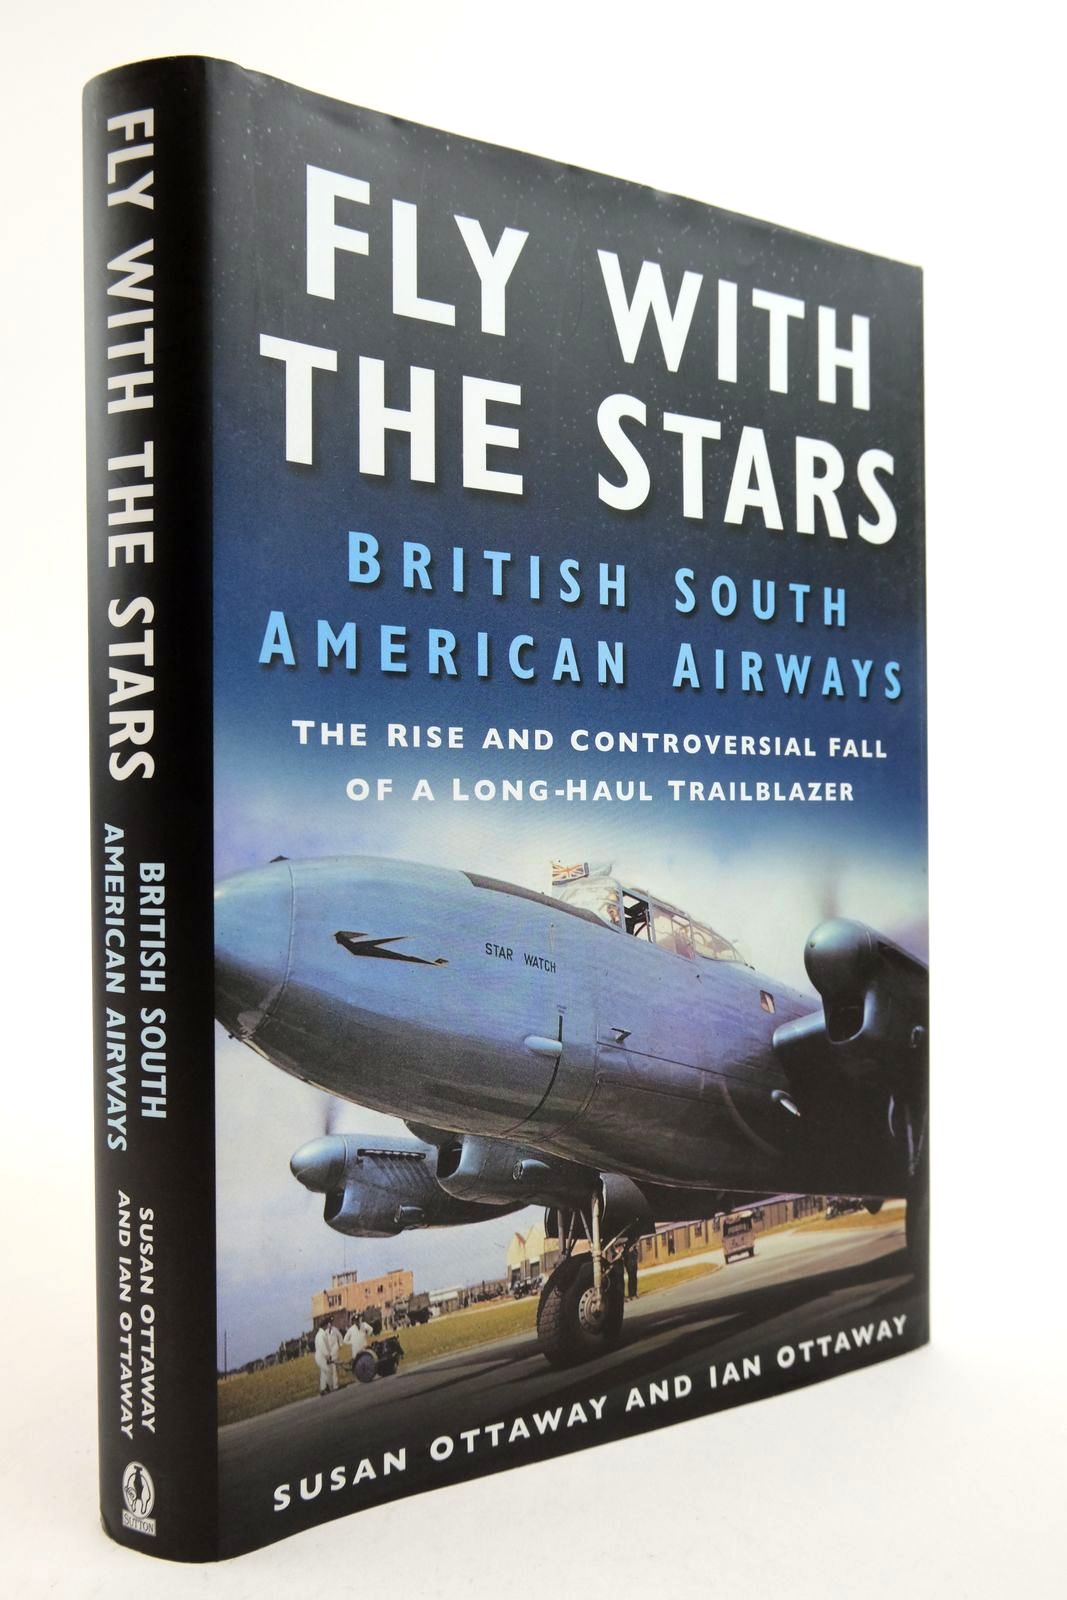 Photo of FLY WITH THE STARS written by Ottaway, Susan Ottaway, Ian published by Sutton Publishing (STOCK CODE: 2139156)  for sale by Stella & Rose's Books